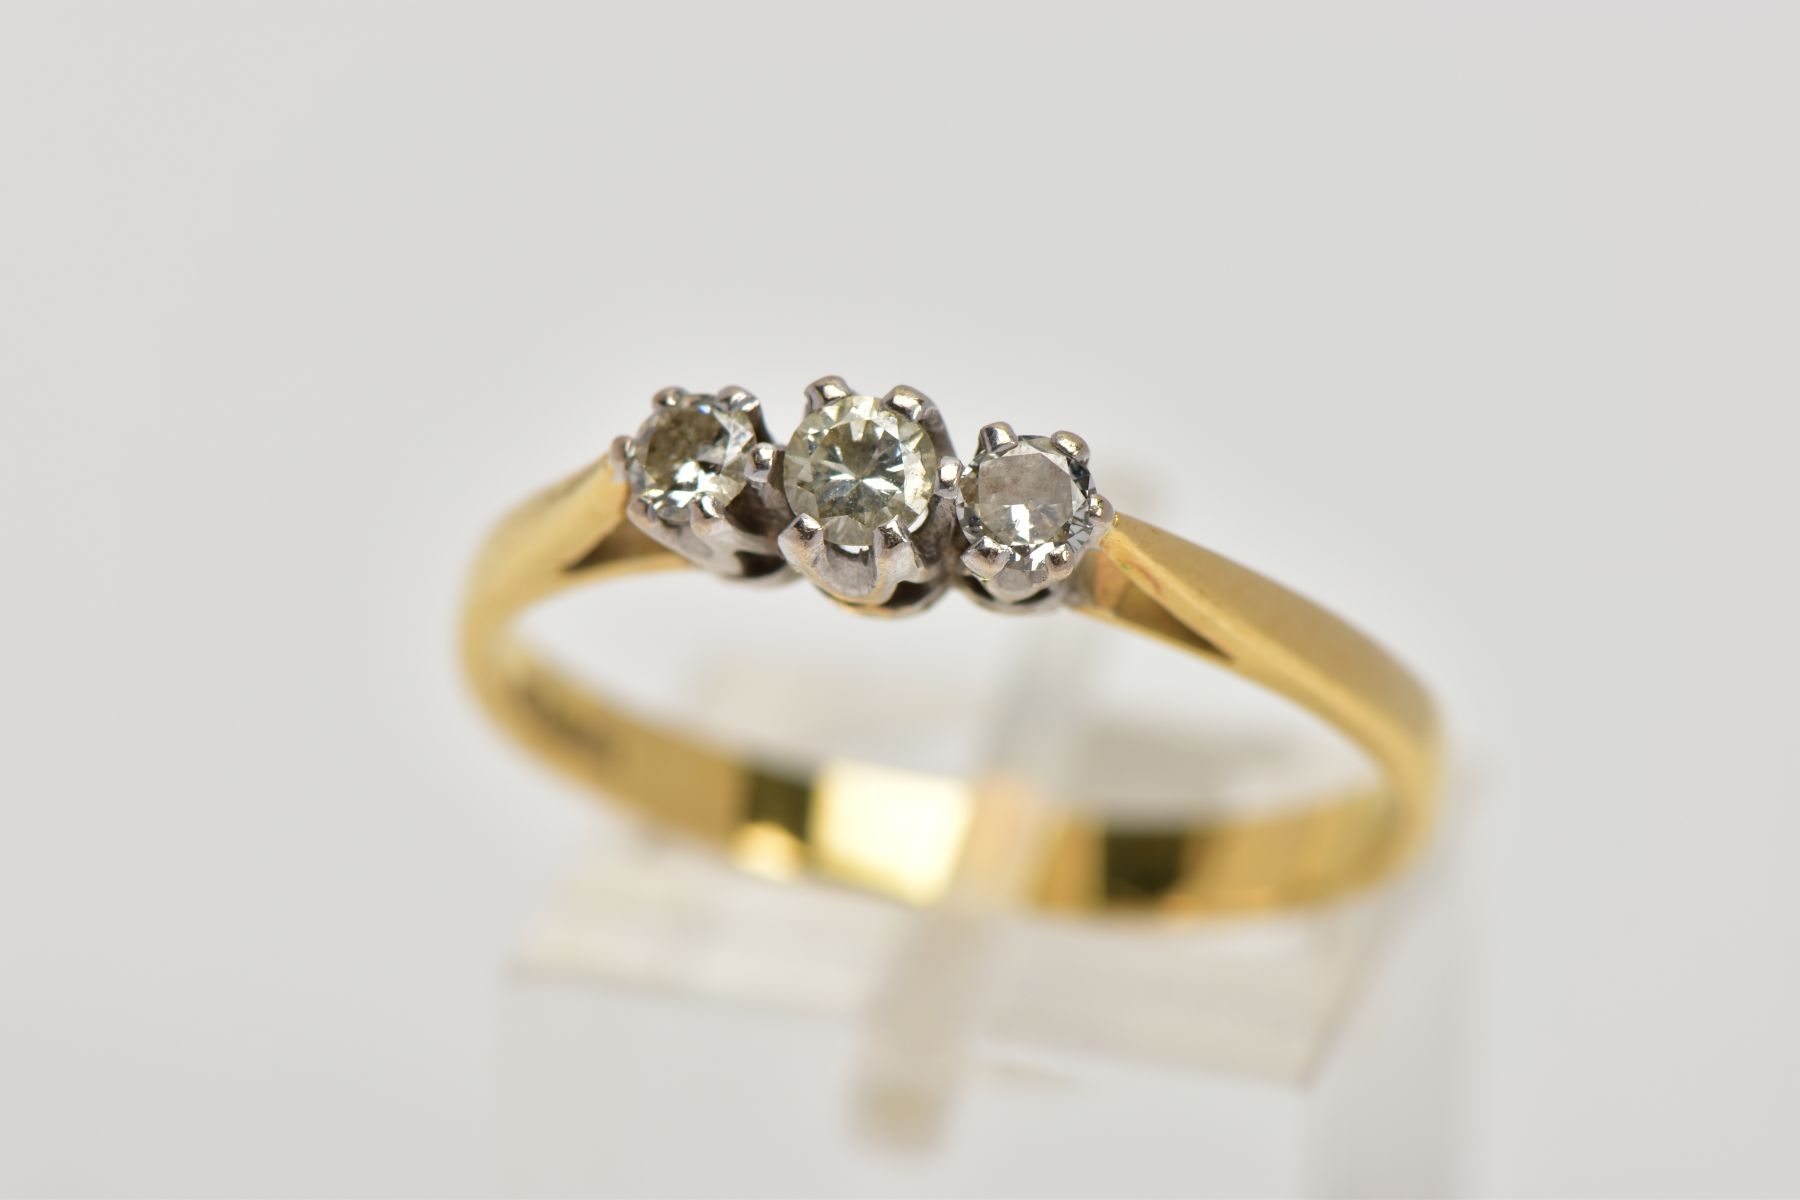 AN 18CT GOLD THREE STONE DIAMOND RING, designed with a row of three graduated round brilliant cut